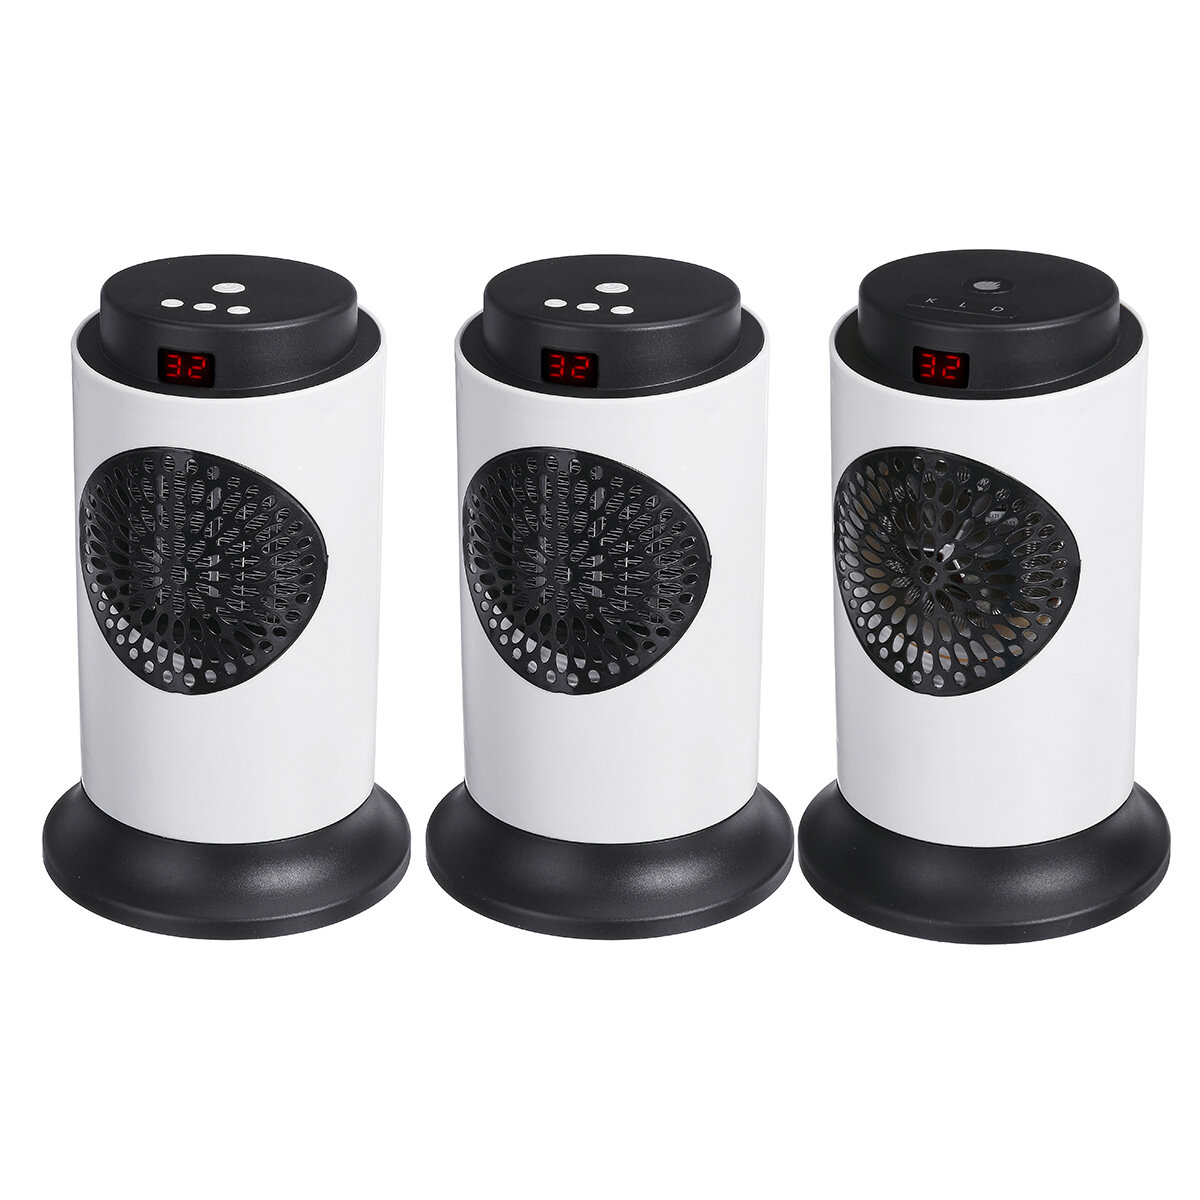 

220V 700W Portable Mini Electric Heater Fan 3 Gears Handy Winter Air Warmer Cooling Silent Automatic Overheat Protection